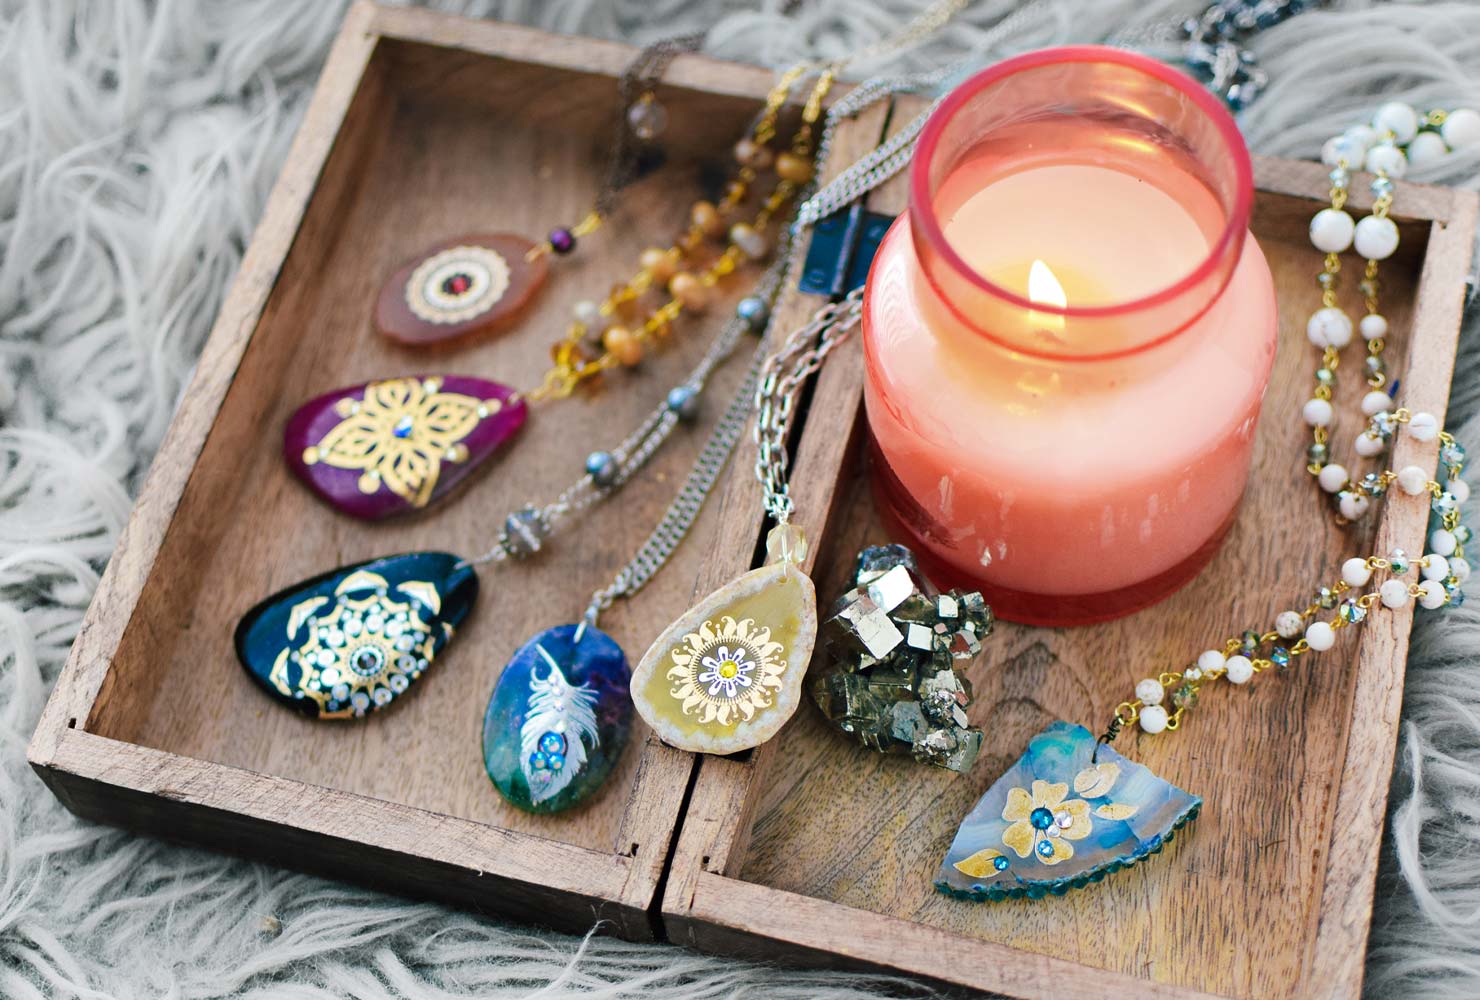 Boho necklaces and pink candle. 